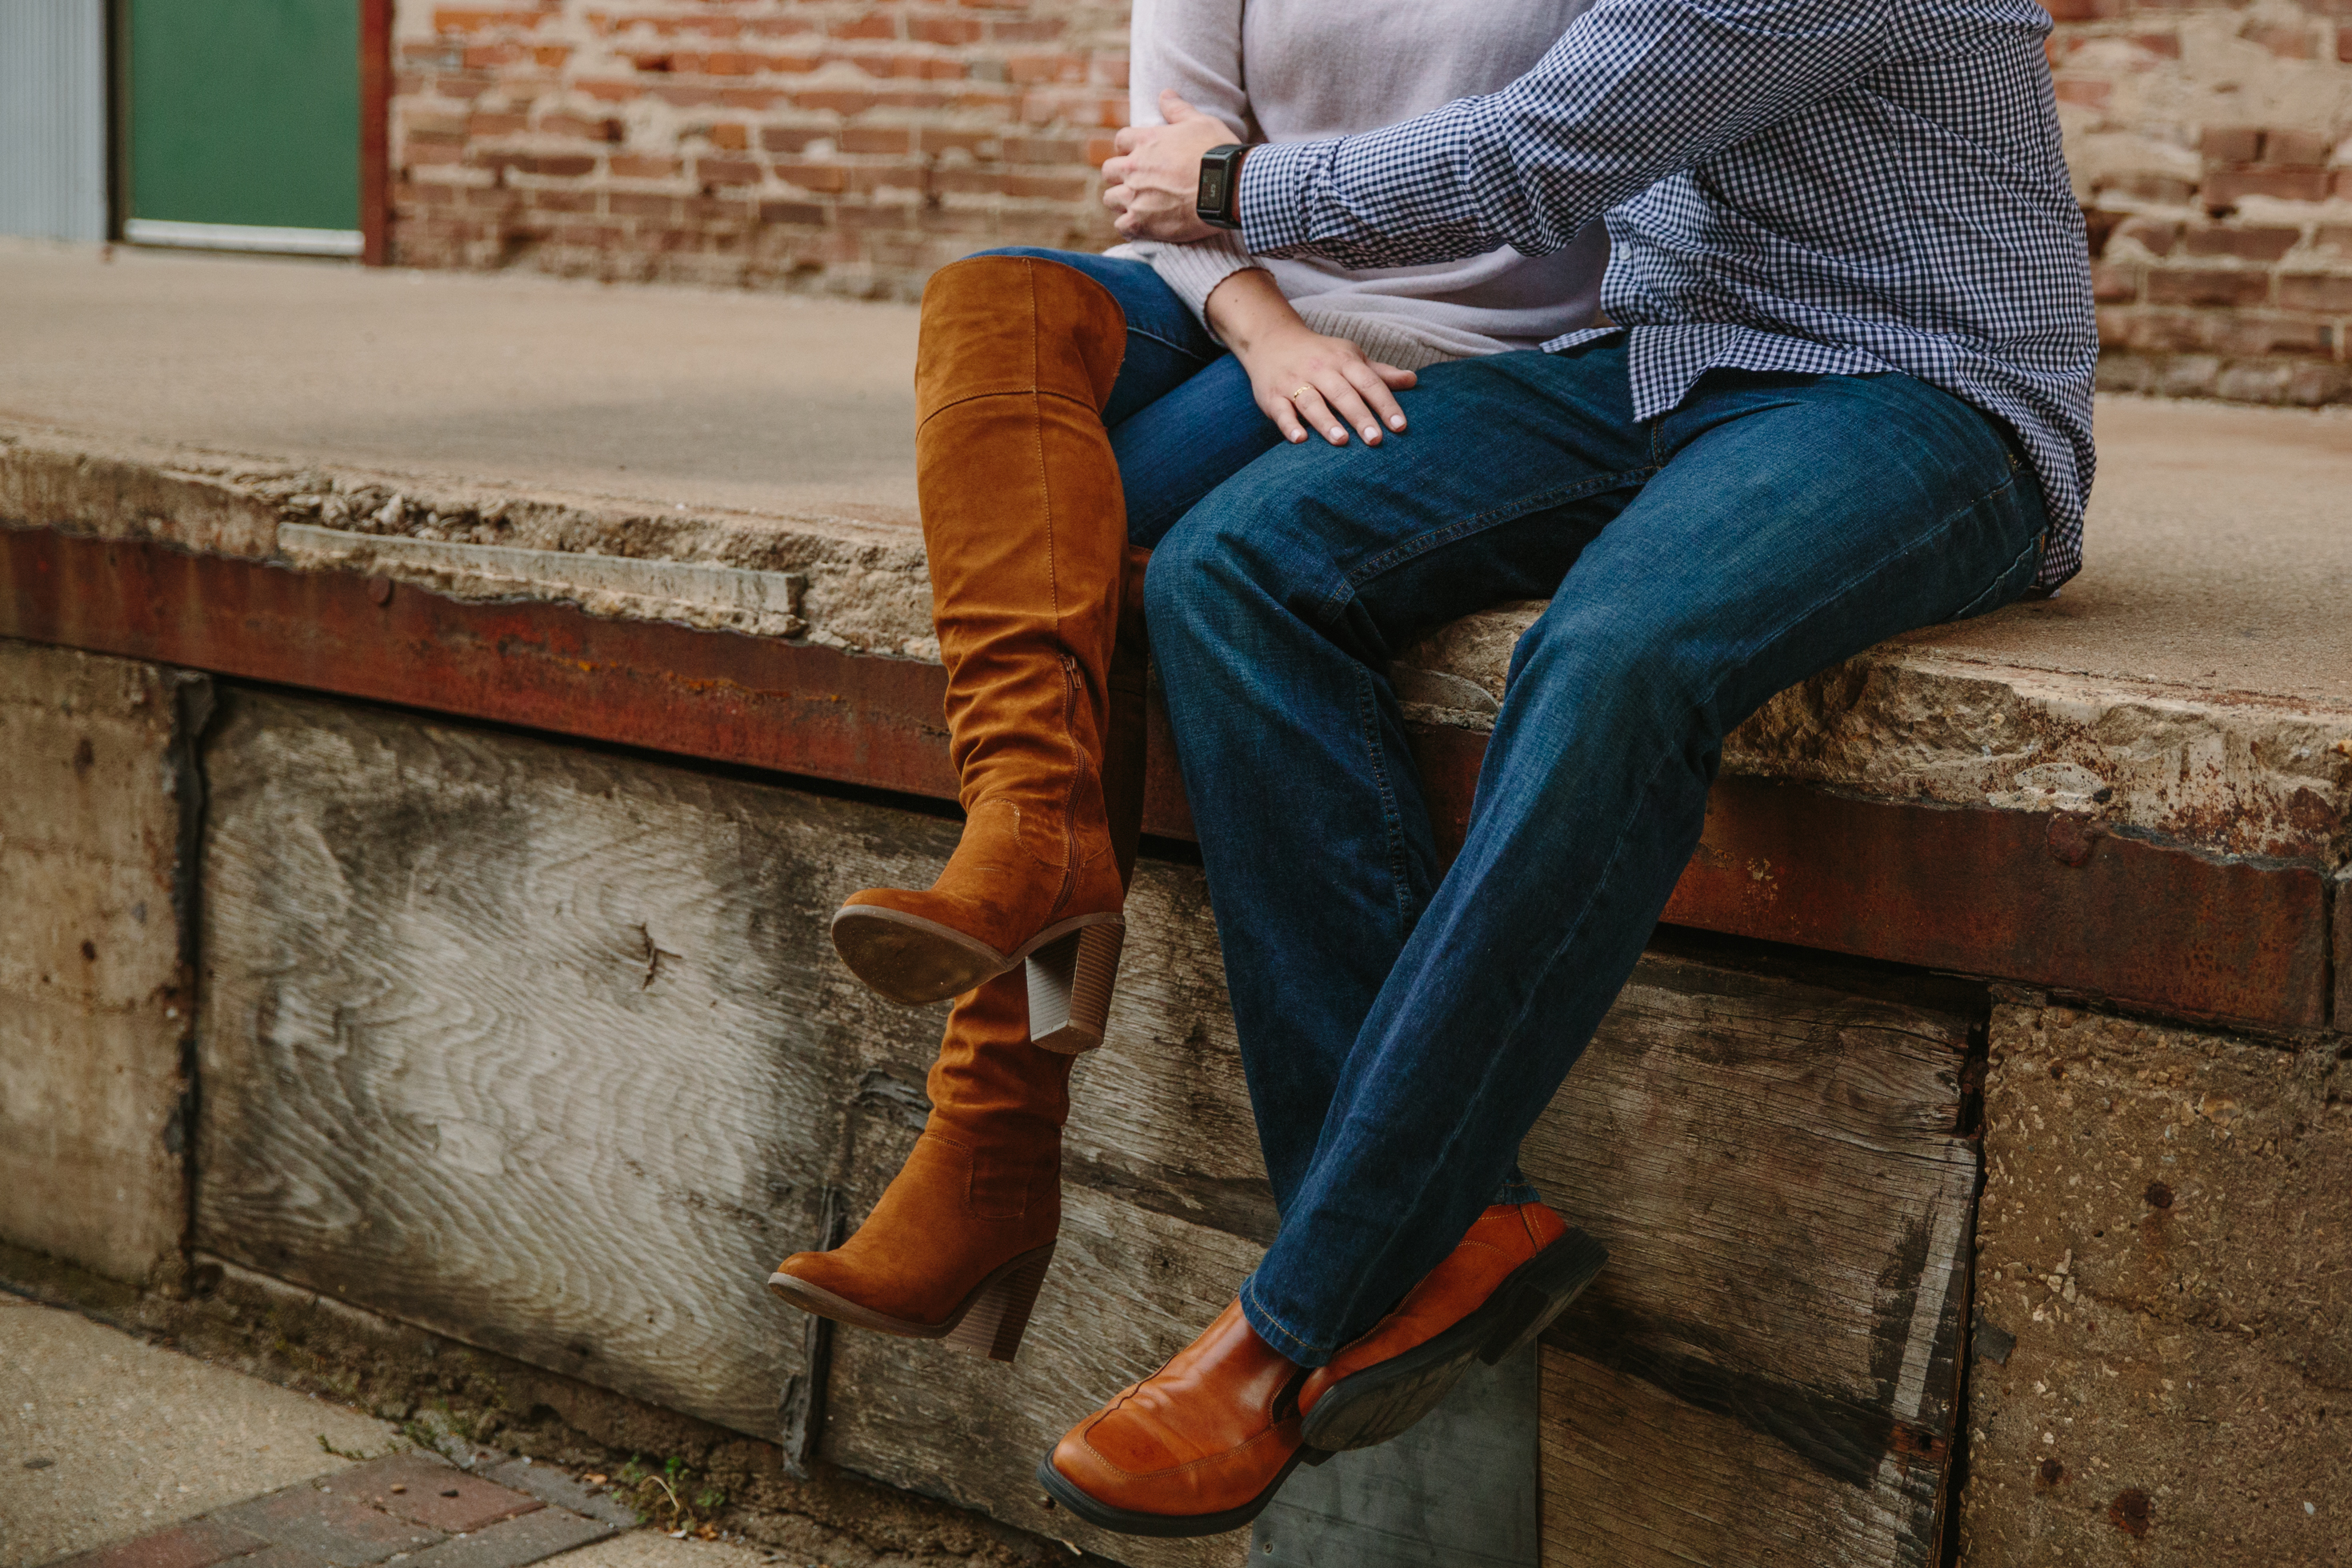 dubuque engagement session by catherine furlin photography, couple sitting in millwork district